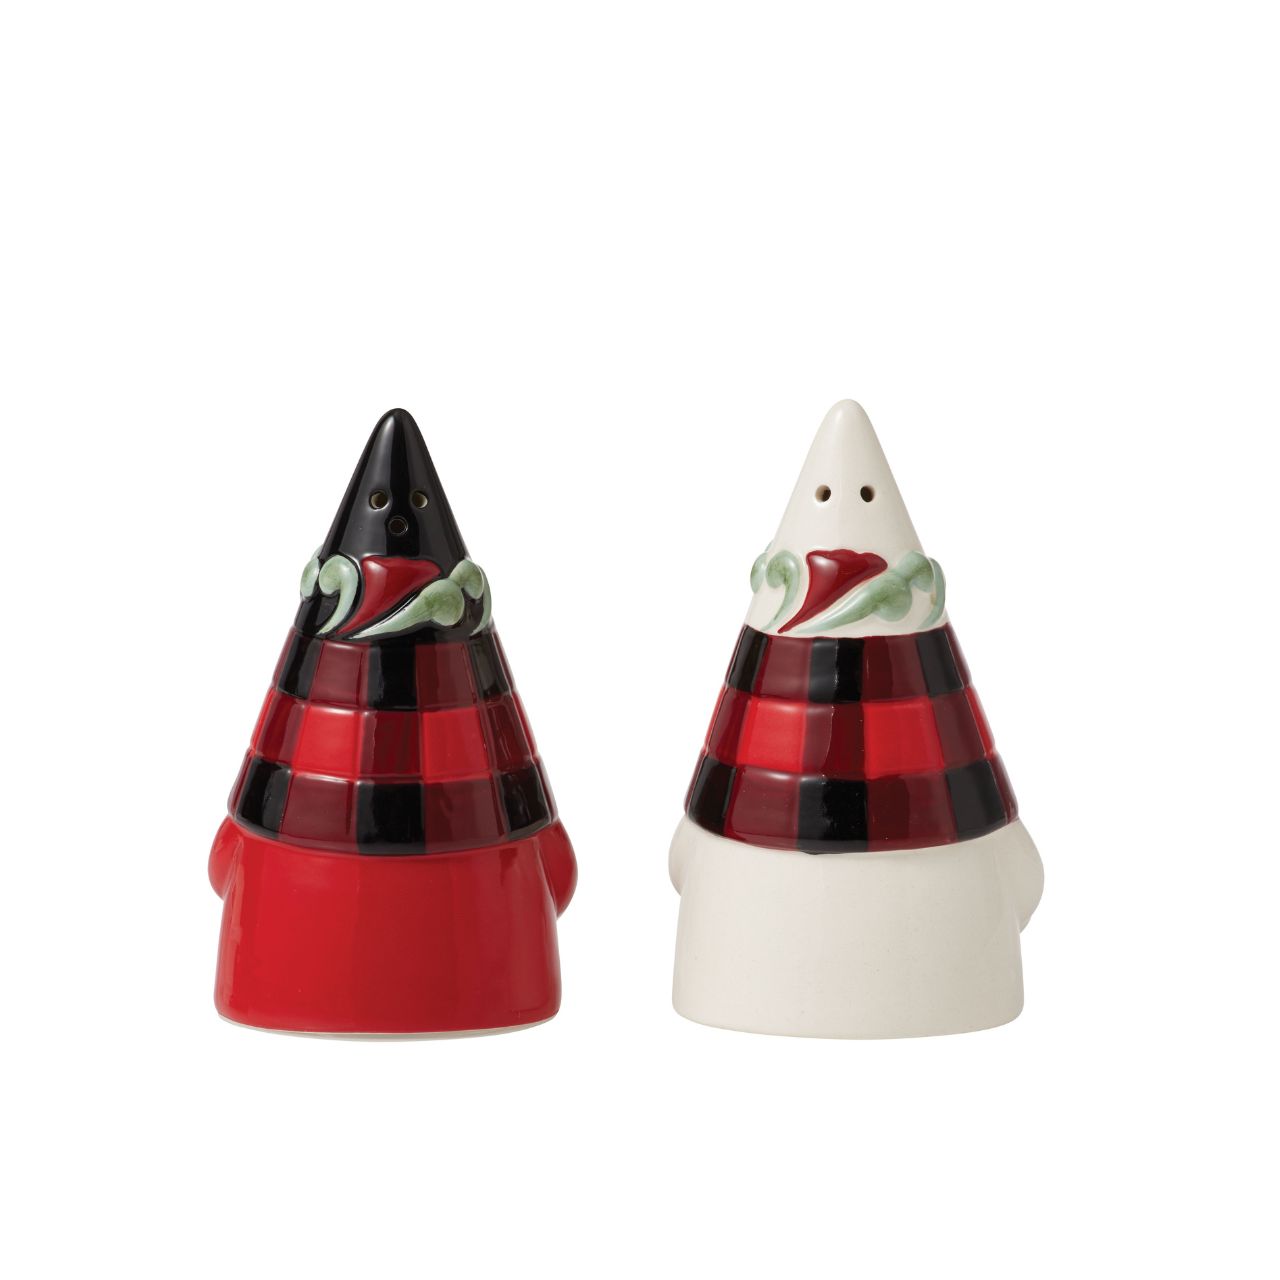 Christmas Highland Glen Salt & Pepper Shakers by Jim Shore  Designed by award winning artist Jim Shore as part of the Heartwood Creek Highland Glen Collection, hand crafted using high quality cast stone and hand painted, these salt & pepper shakers is perfect for the Christmas season. 